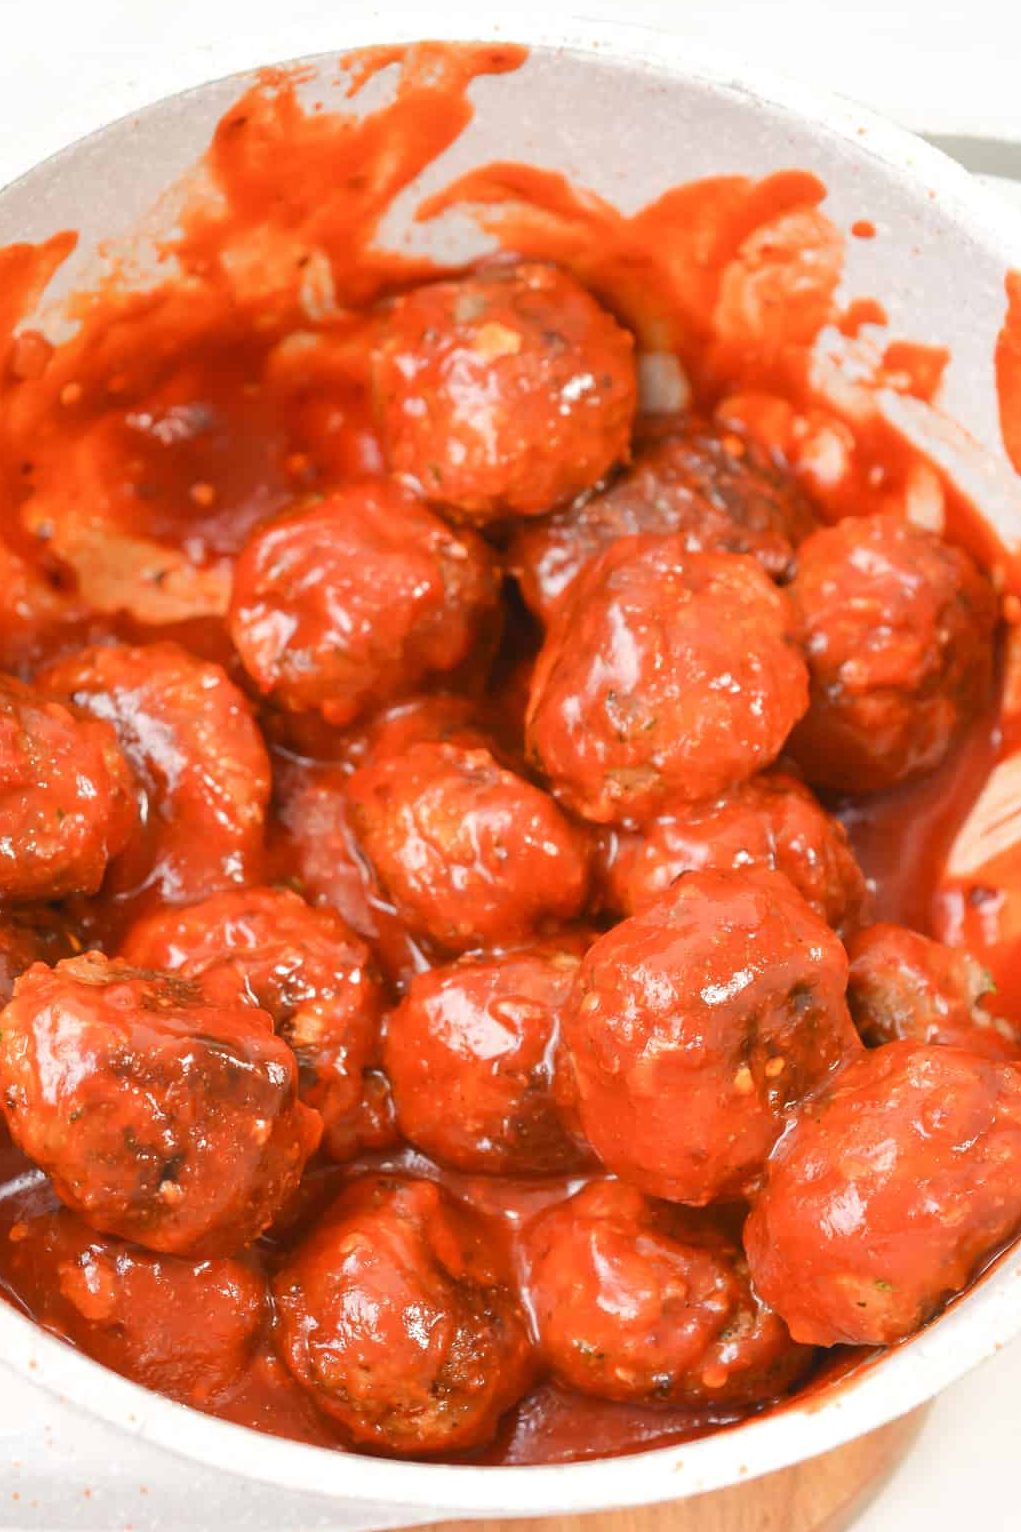 Toss the meatballs in the sauce once cooked through and serve.